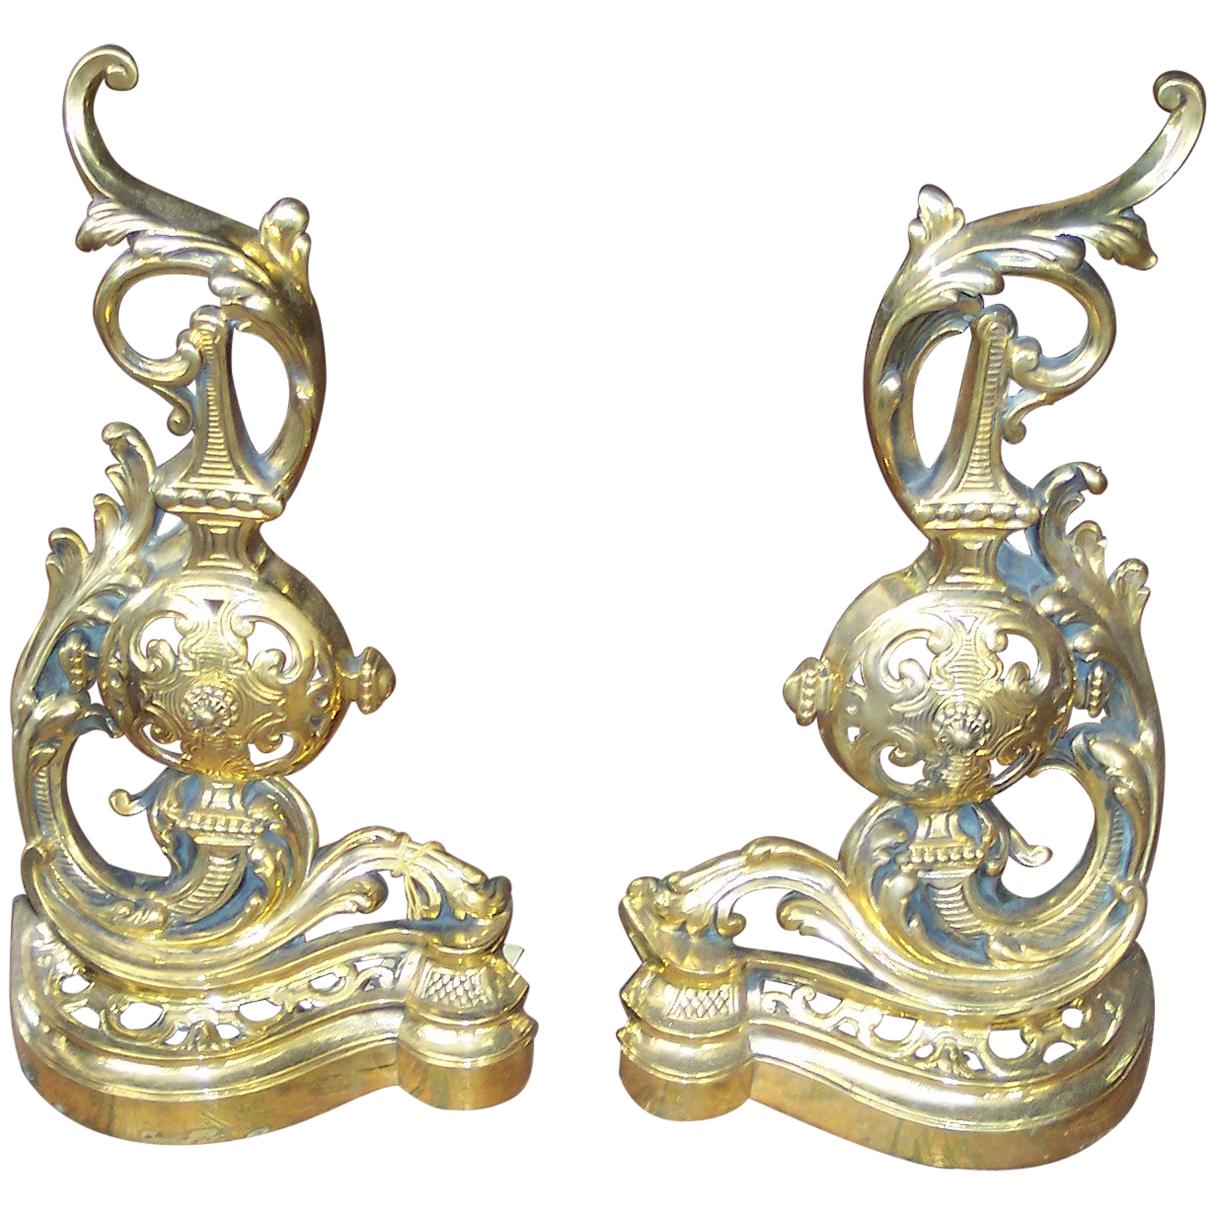 Pair of Antique French Cast Brass Rococo Style Chenet or Andirons For Sale